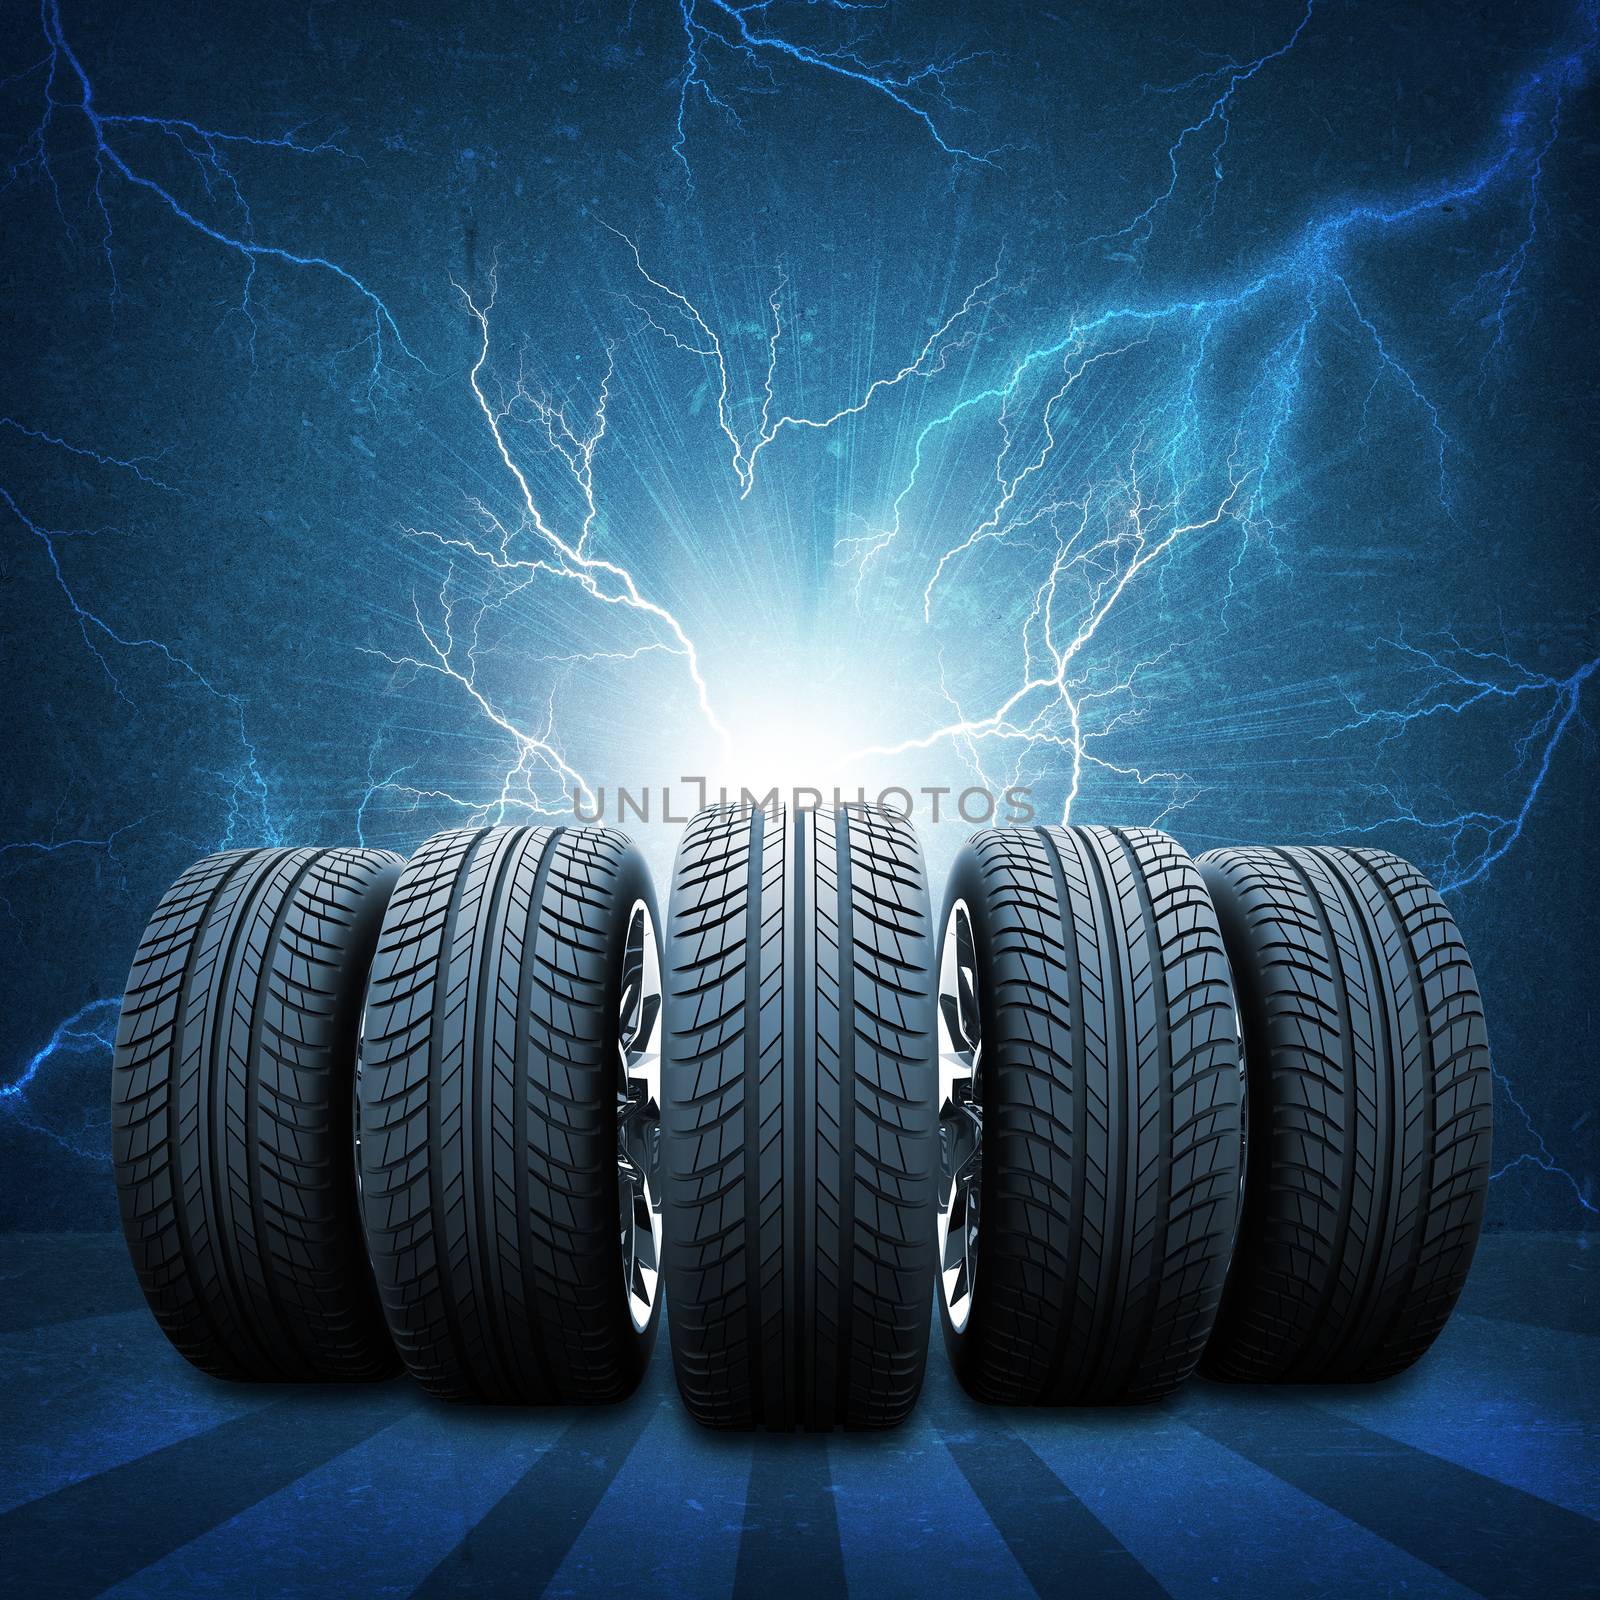 Five of new car wheels. Abstract background is concrete wall, lightning and stripes at bottom